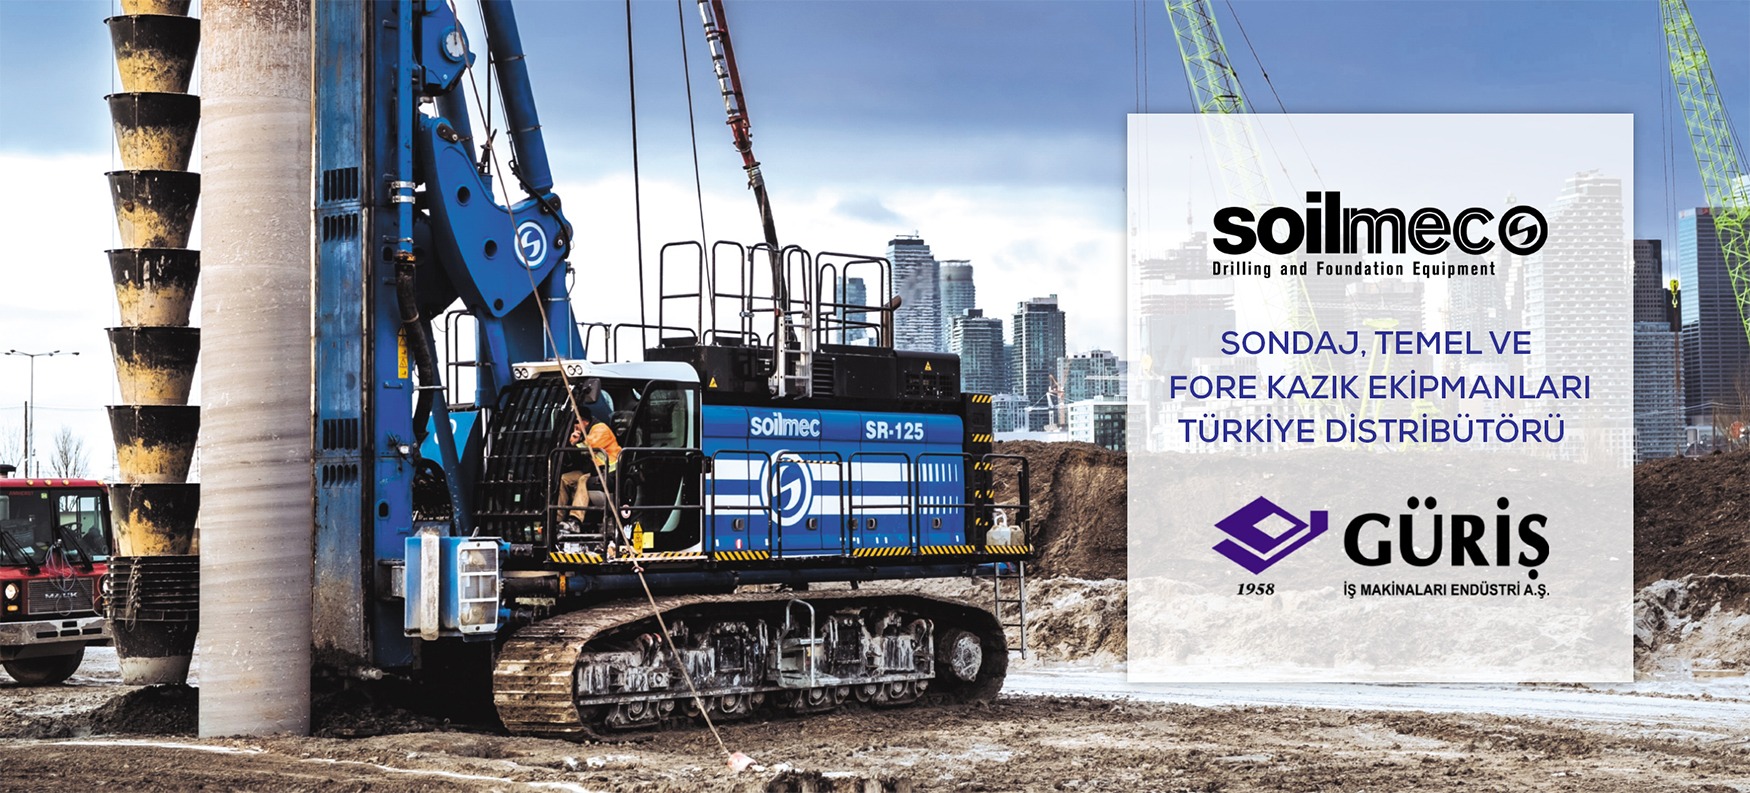 Soilmeco Drilling and Foundation Equipment